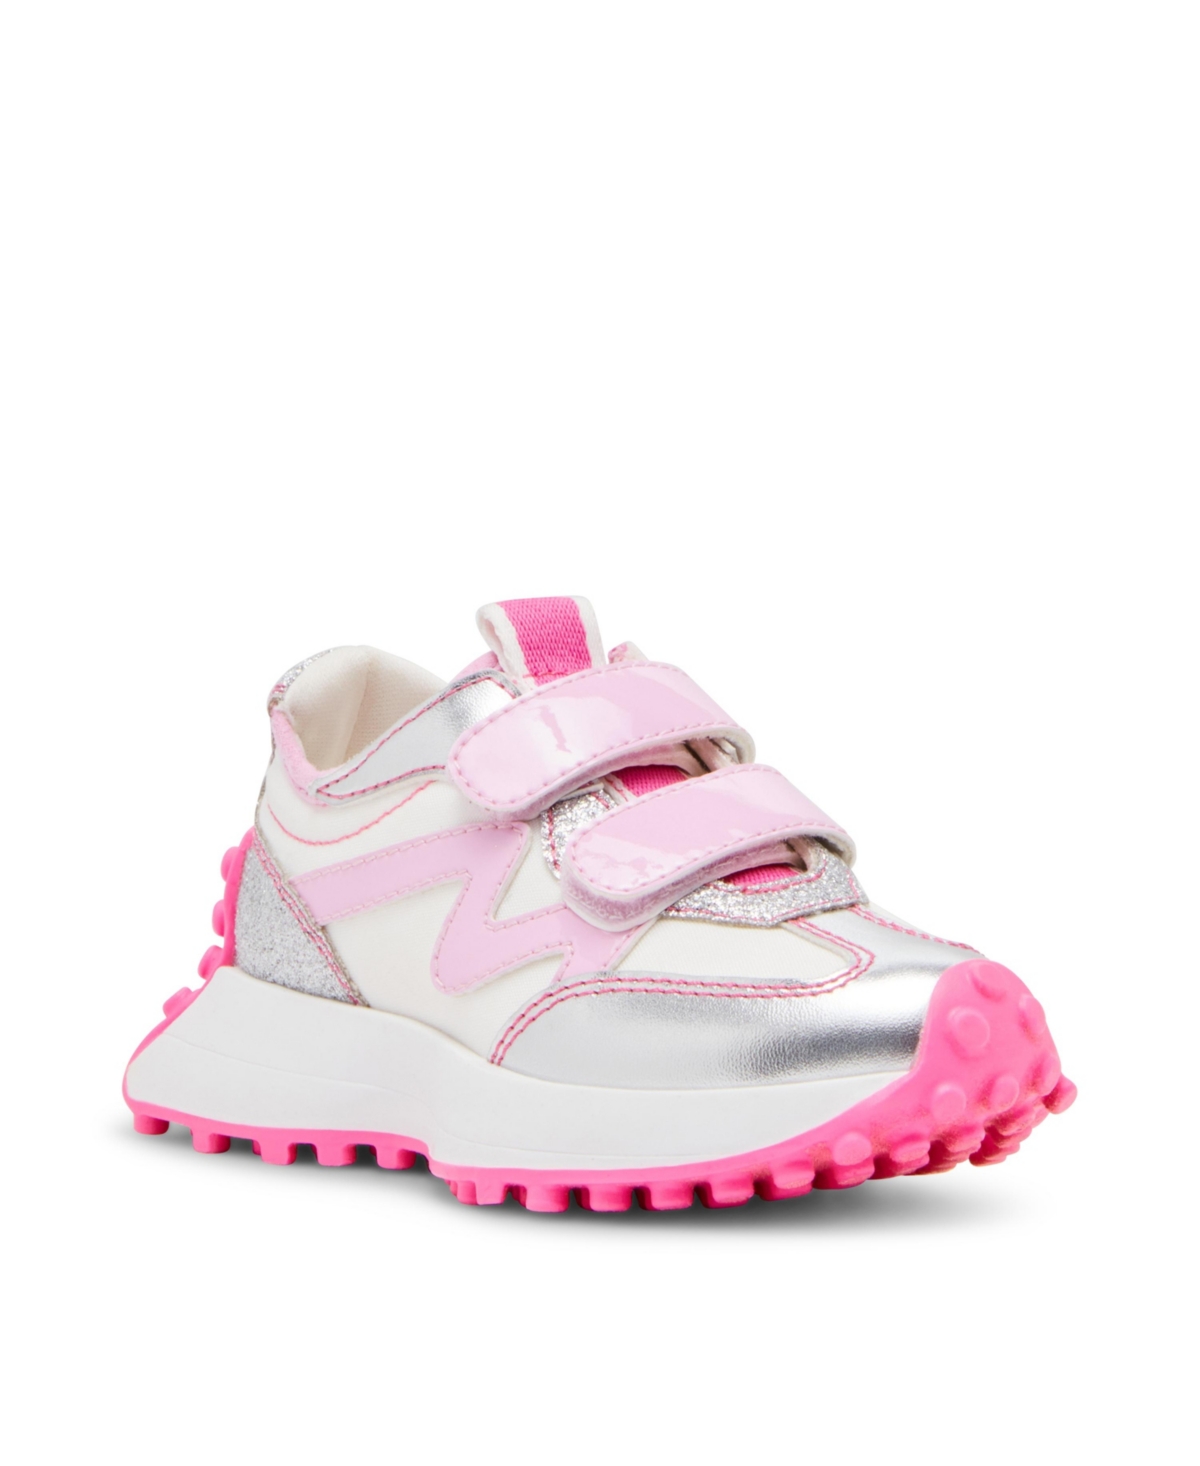 Steve Madden Kids' Toddler Girls Tcampo Comfort Sneakers In Pink Multi